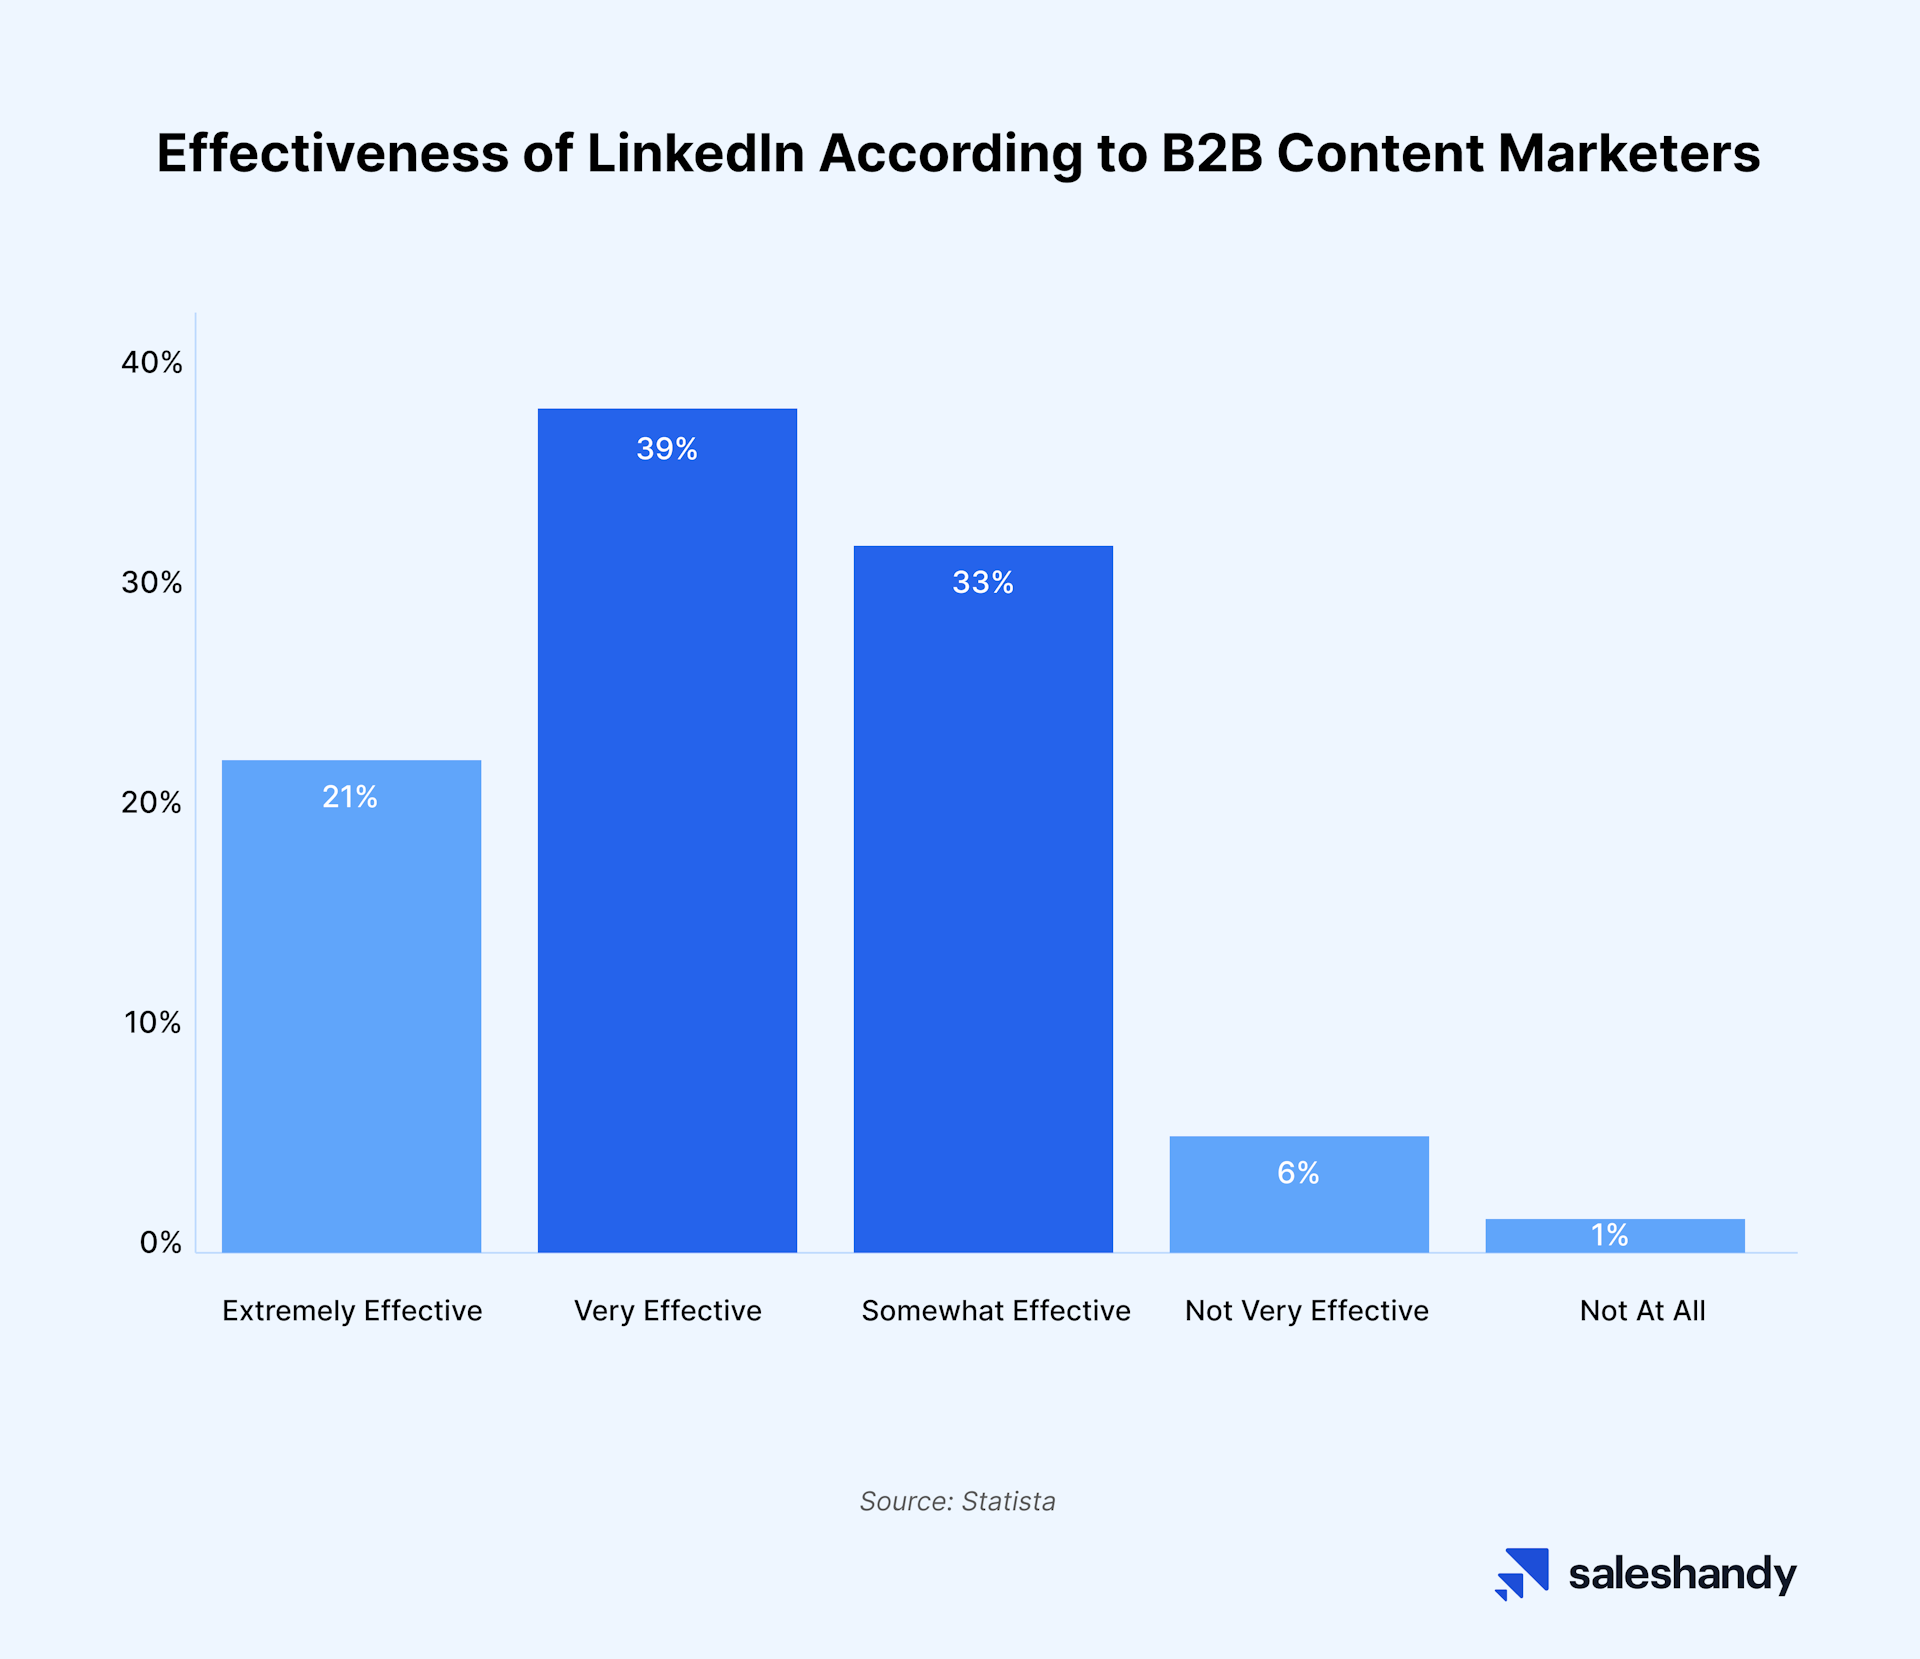 Graph showing survey result on effectiveness of LinkedIn according to B2B marketers.